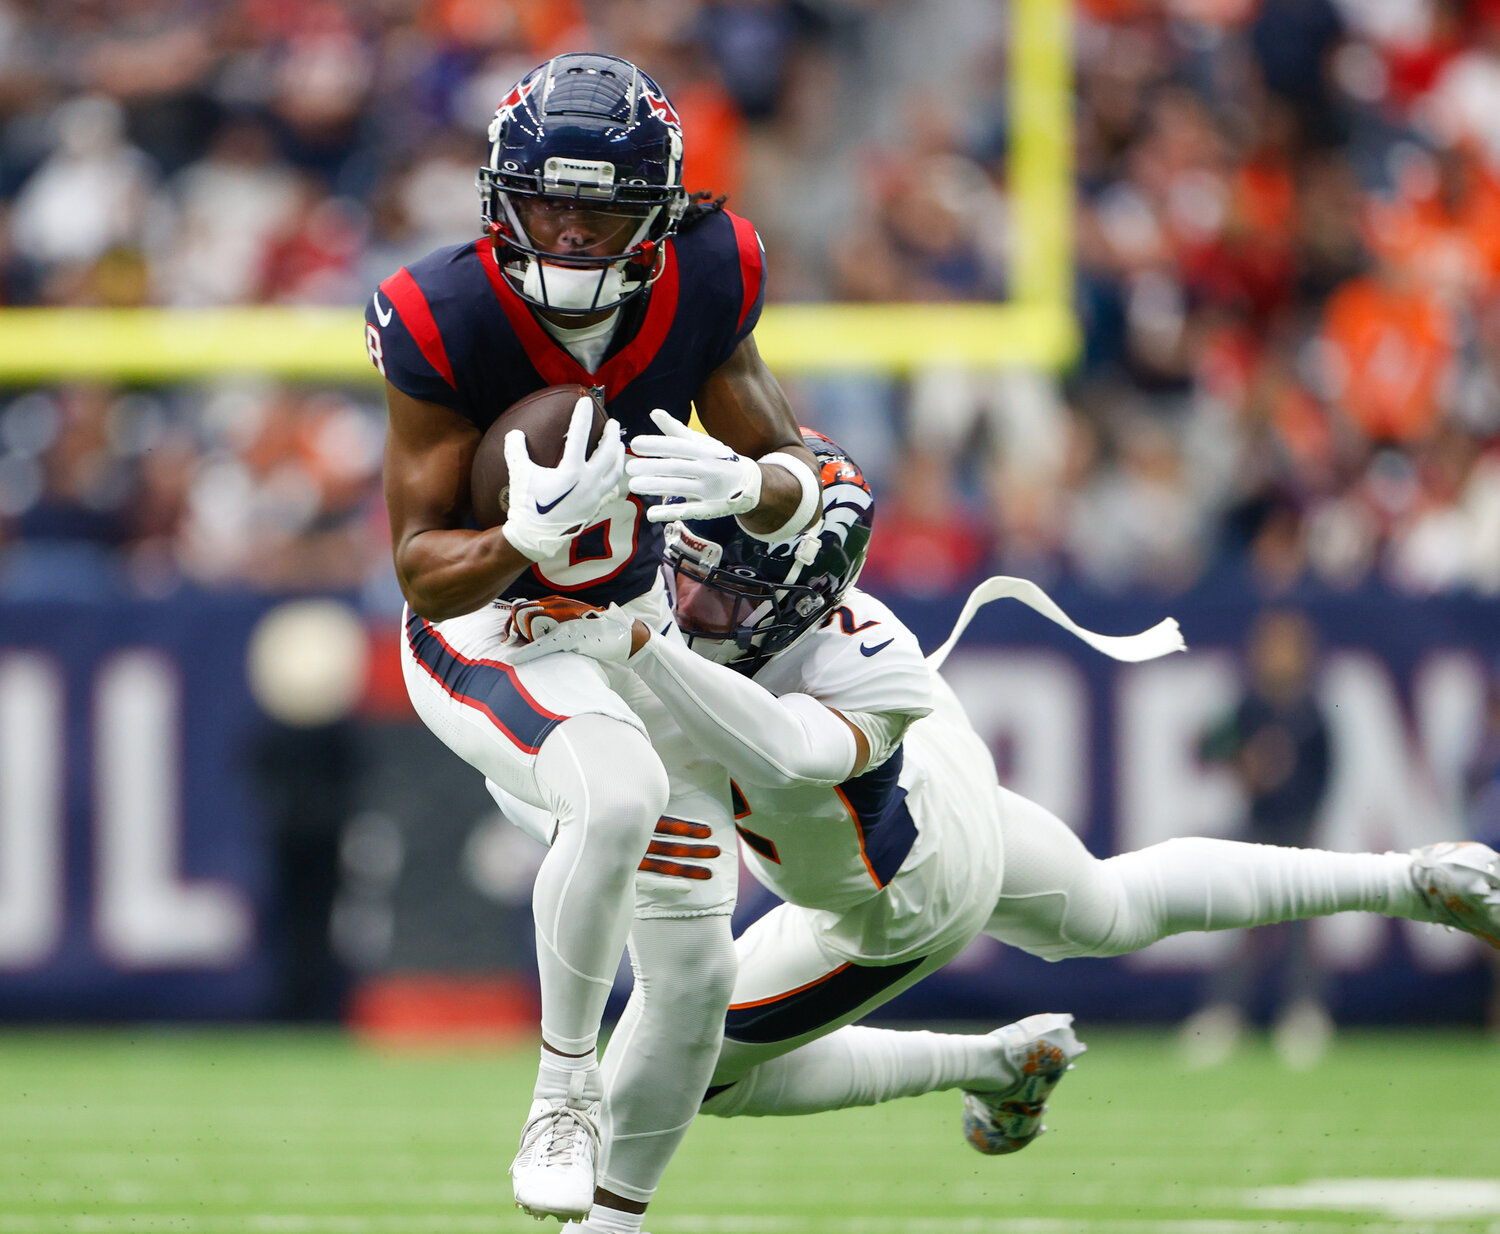 Texans wide receiver John Metchie III (8) is tackled after a catch during an NFL game between the Texans and the Broncos on December 3, 2023 in Houston. The Texans won, 22-17.